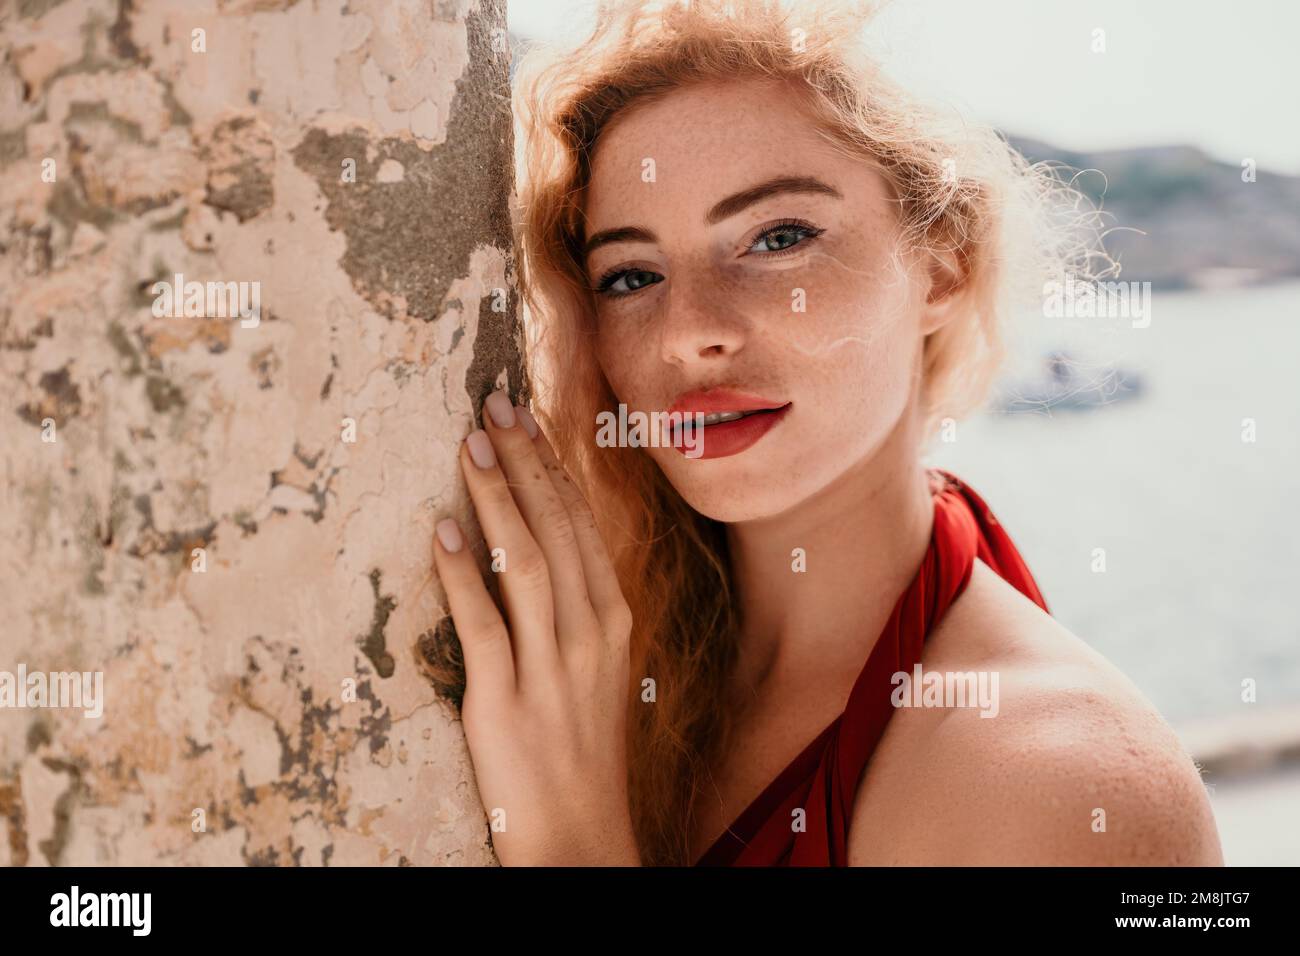 Redhead woman portrait. Curly redhead young caucasian woman with freckles looking at camera and smiling. Cute woman close up portrait in a red long Stock Photo